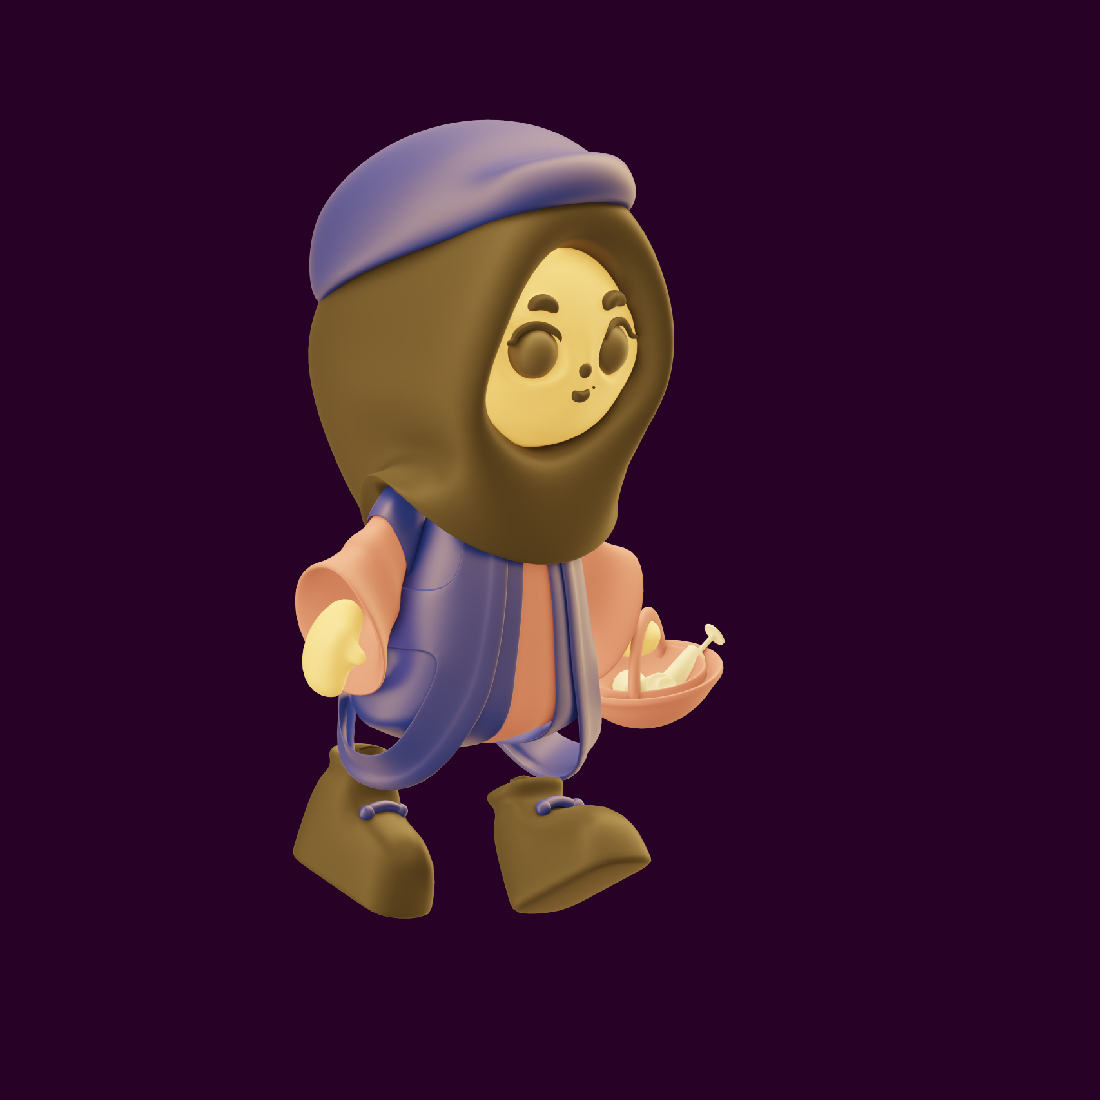 Cartoon character wearing a hoodie and a scarf.